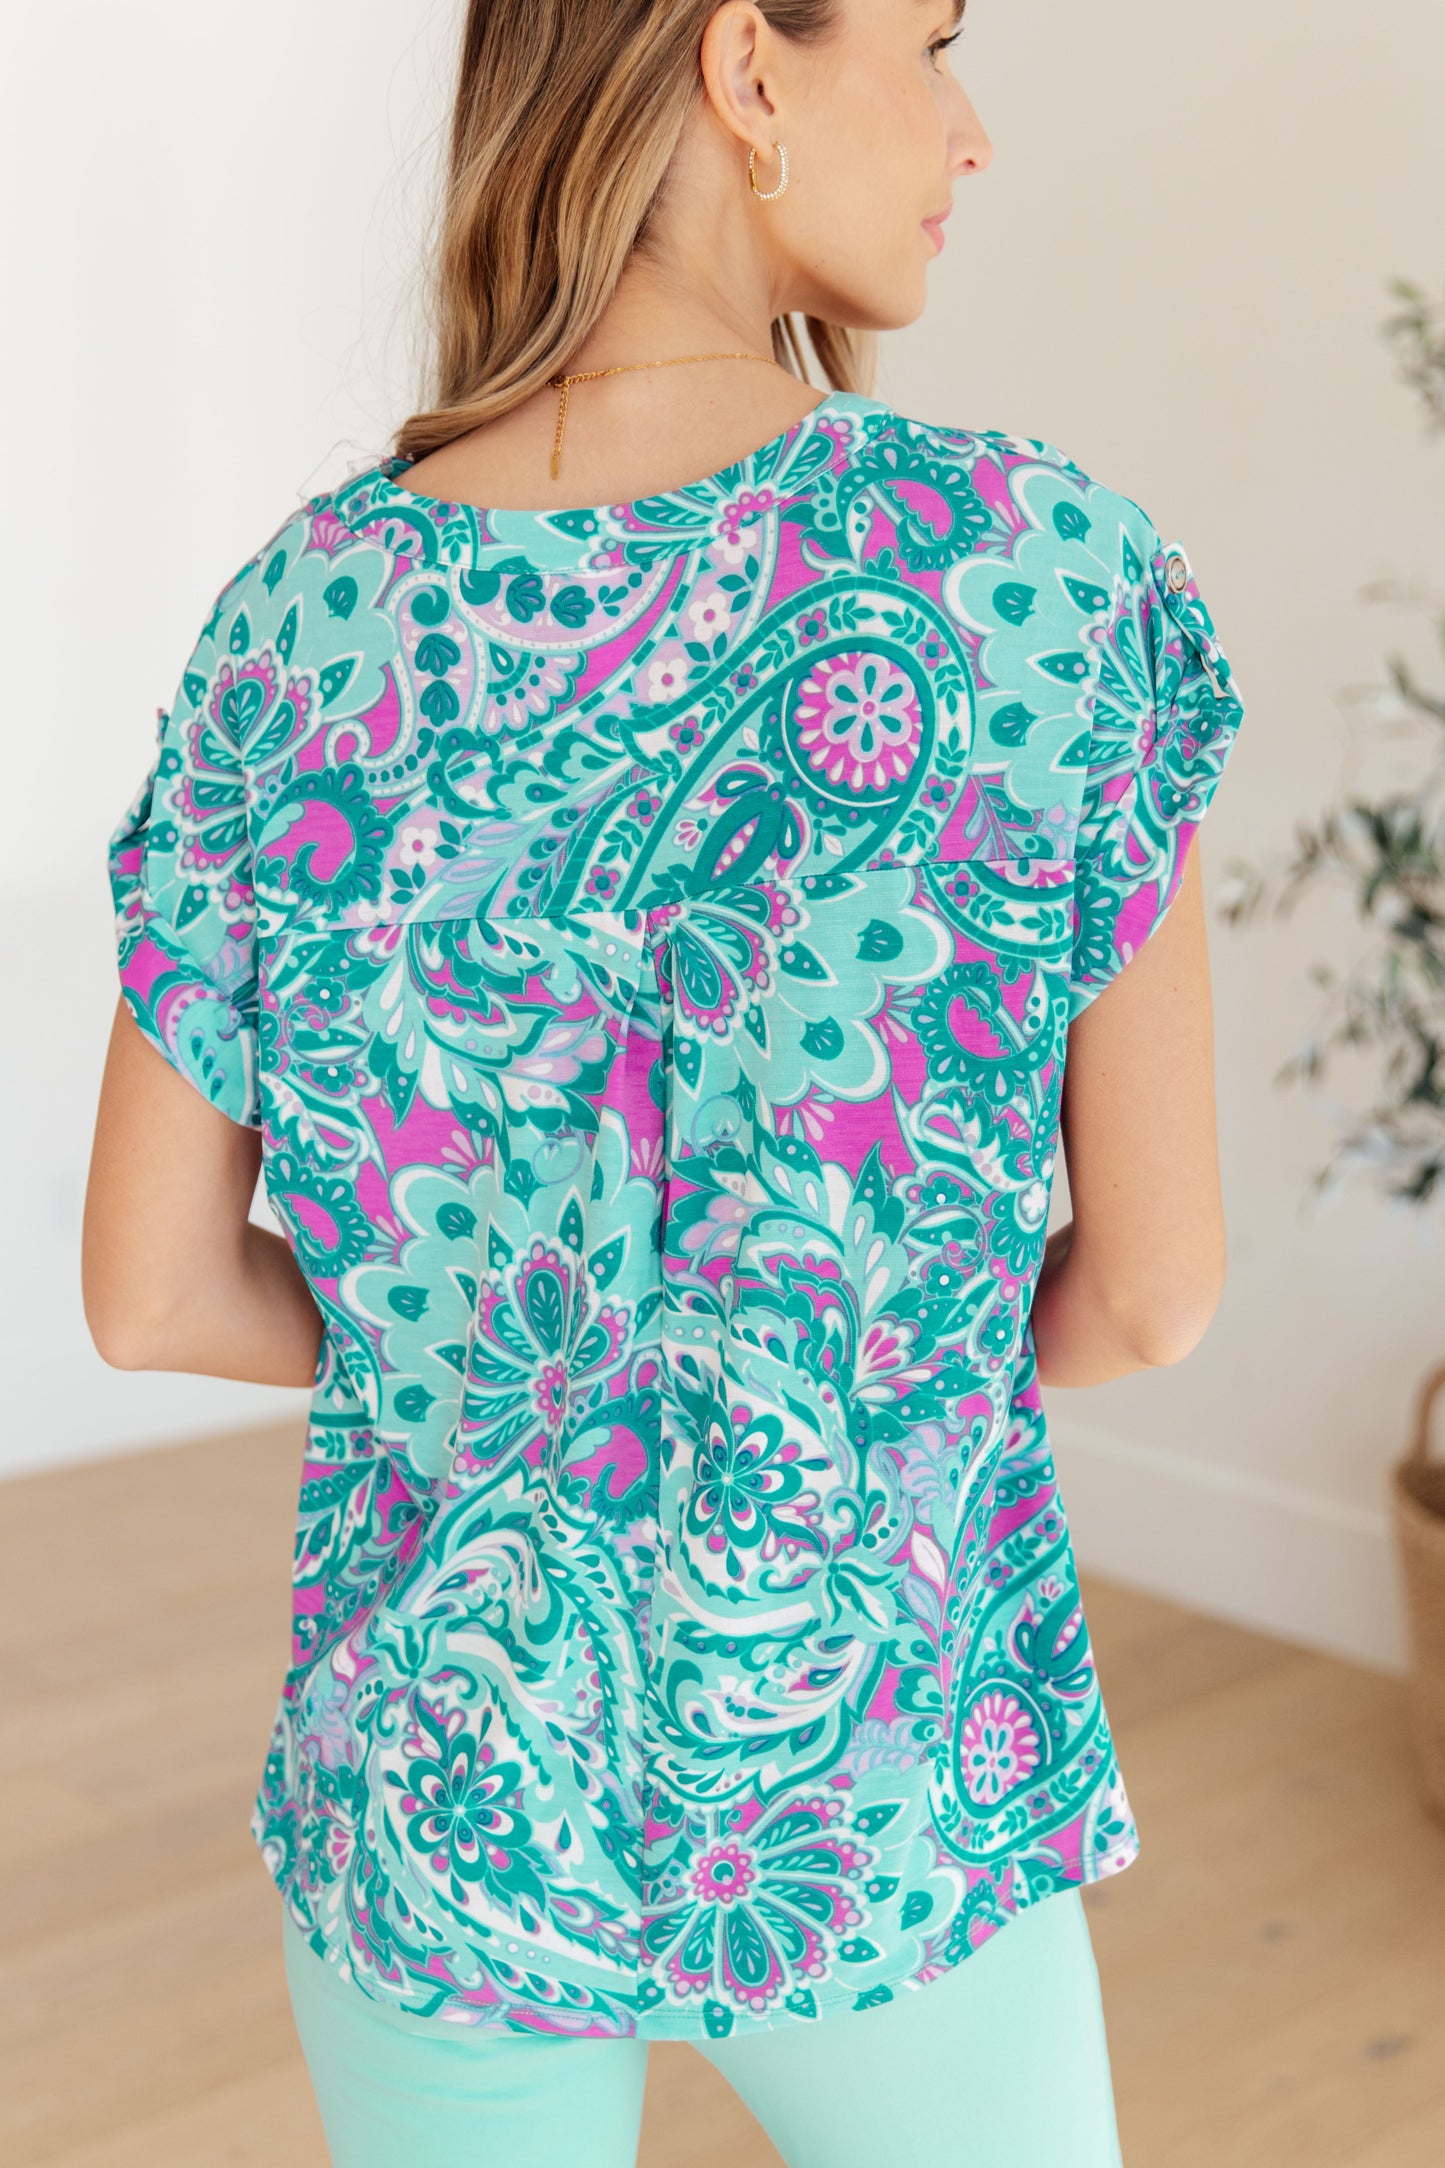 Lizzy Cap Sleeve Top in Magenta and Teal Paisley (Online Exclusive)